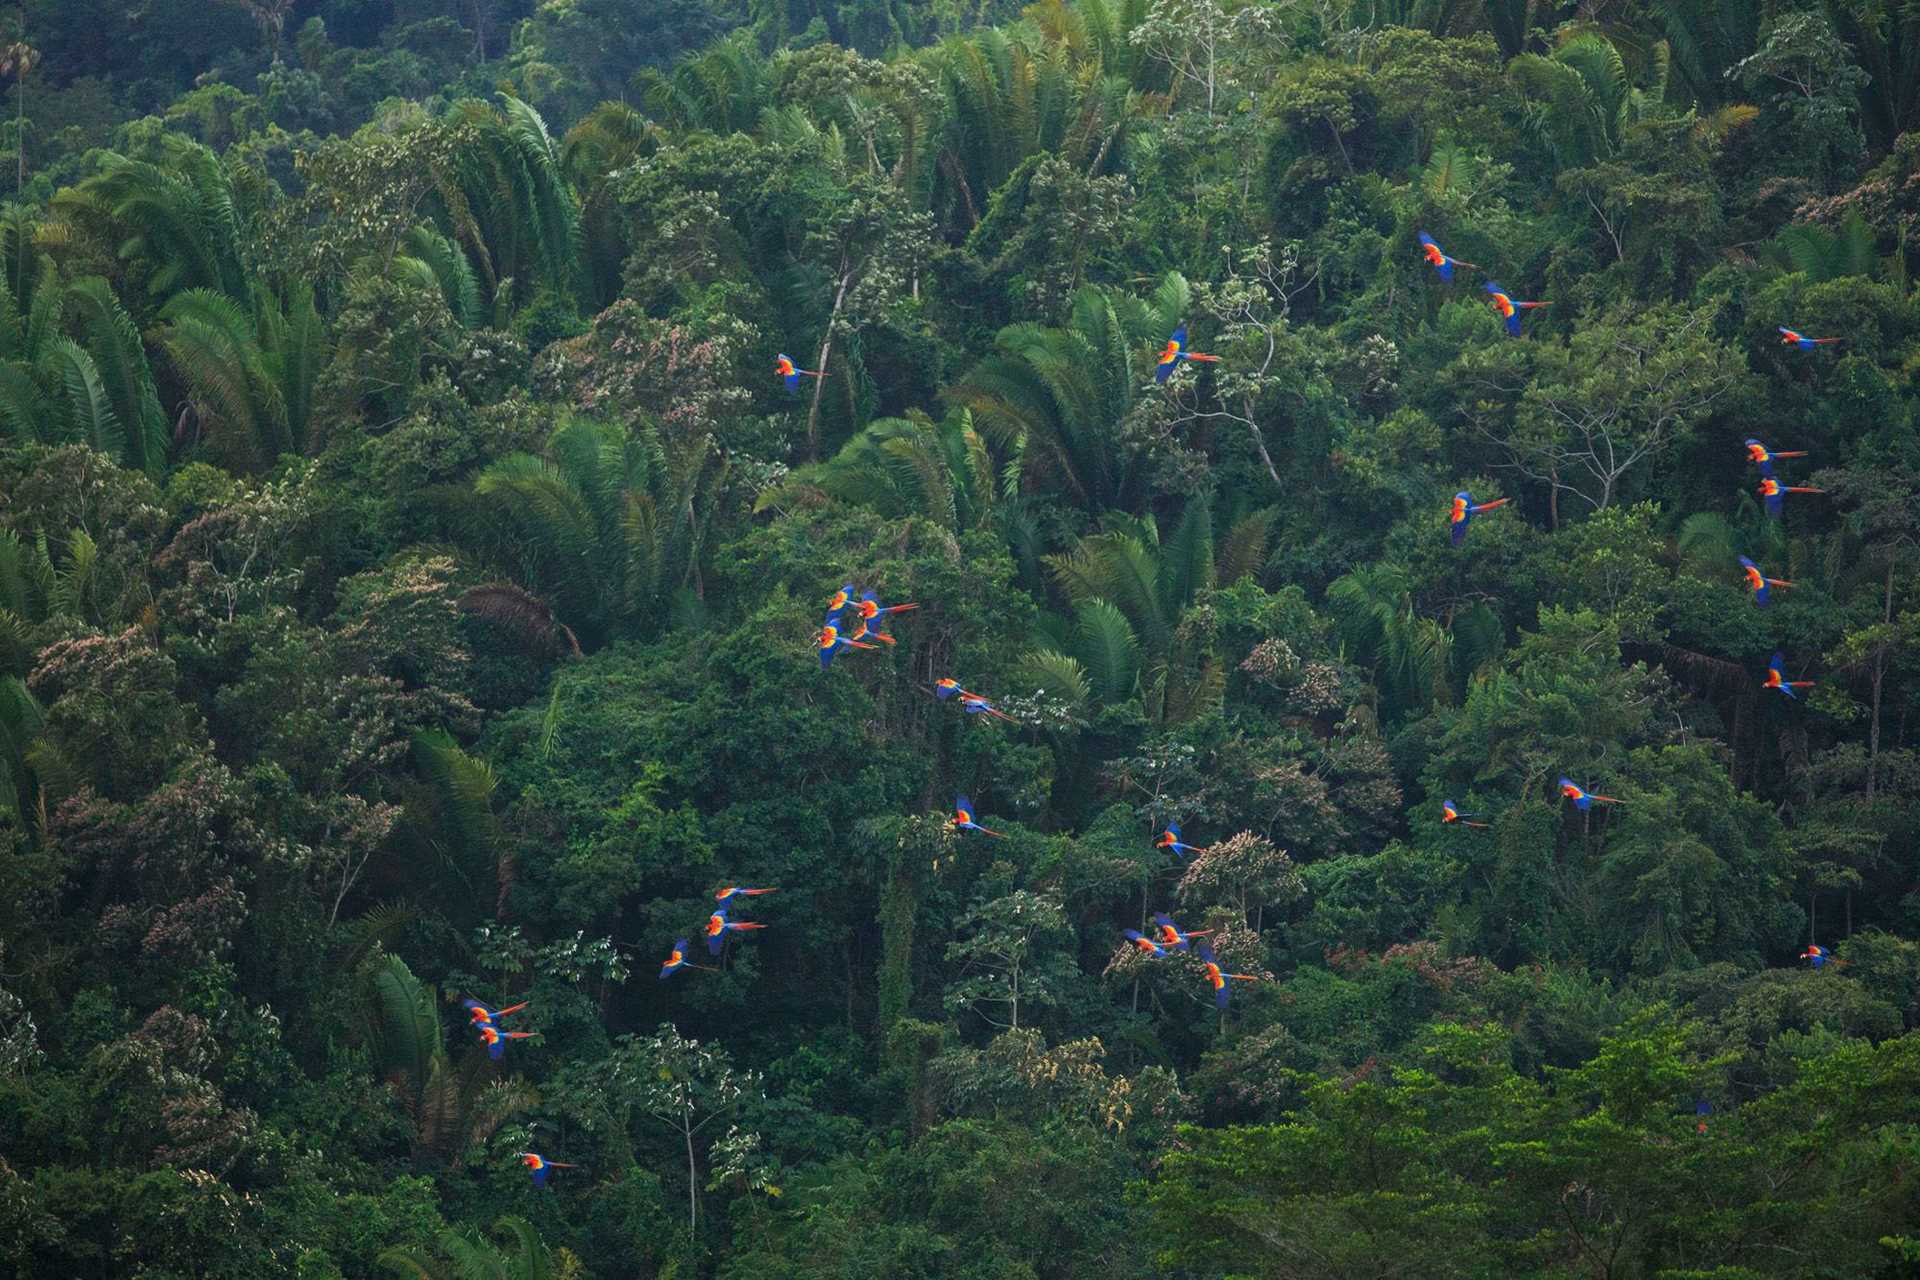 aerial view of forest with red macaws in flight